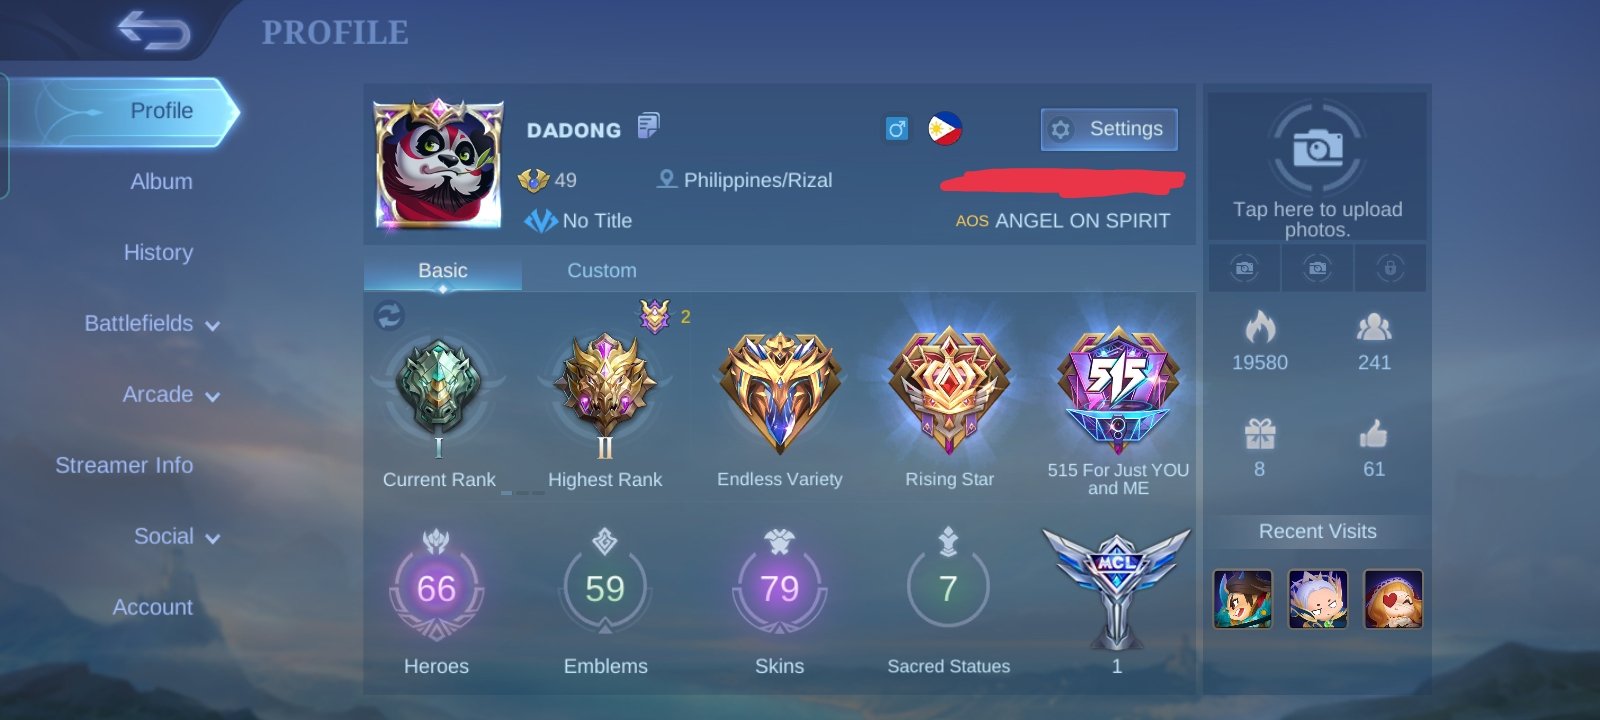 MOBILE LEGENDS (PILOT SERVICE, BUY AND SELL ACCOUNT, SKINS, SQUAD